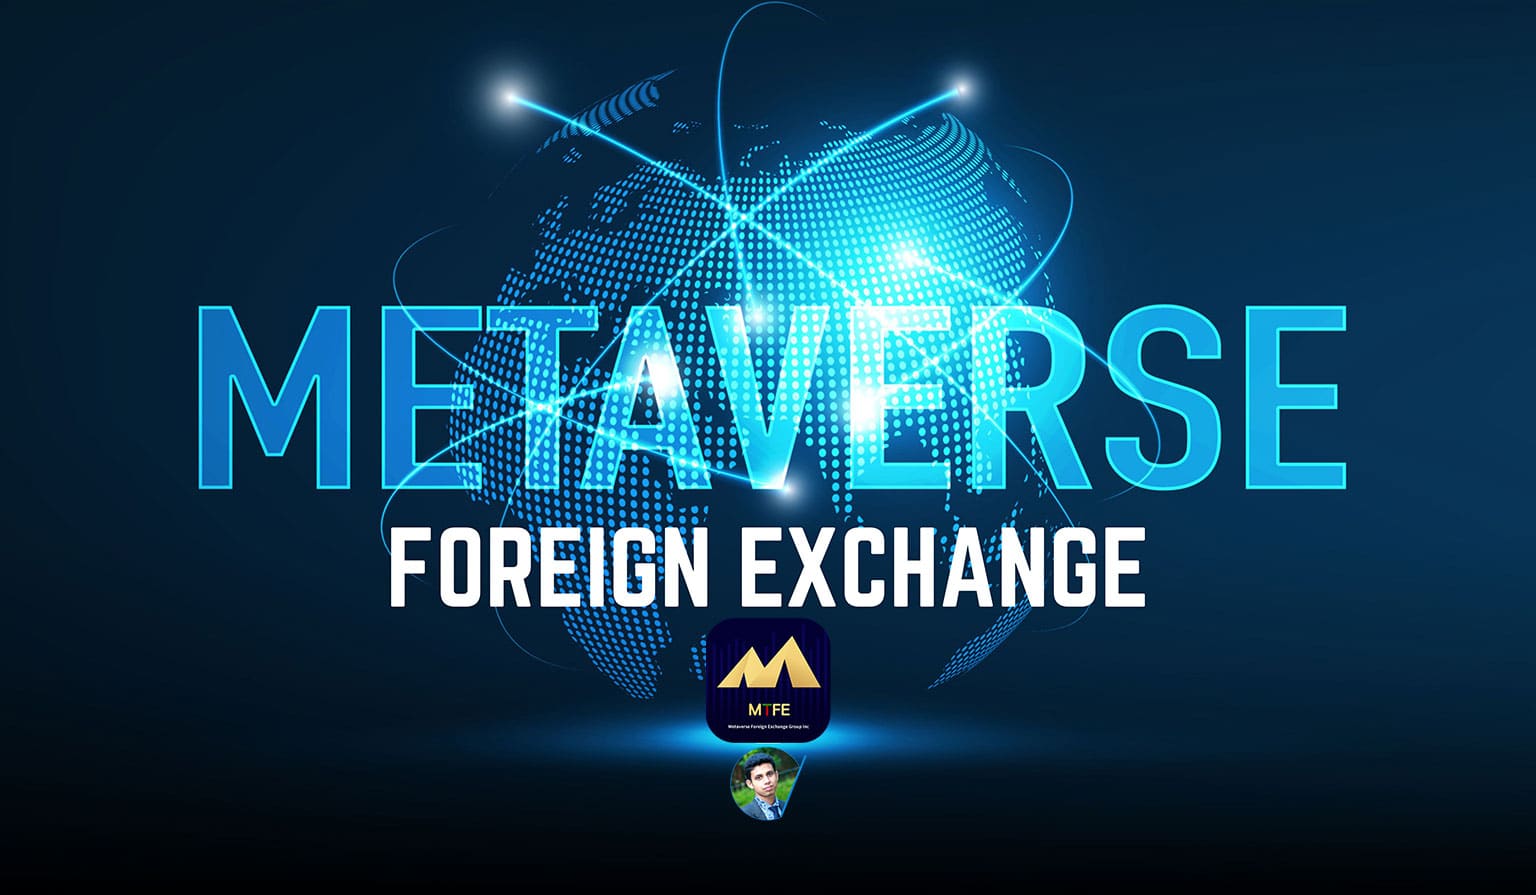 Metaverse Foreign Exchange: Unleashing the Next Wave of Global Financial Transformation!